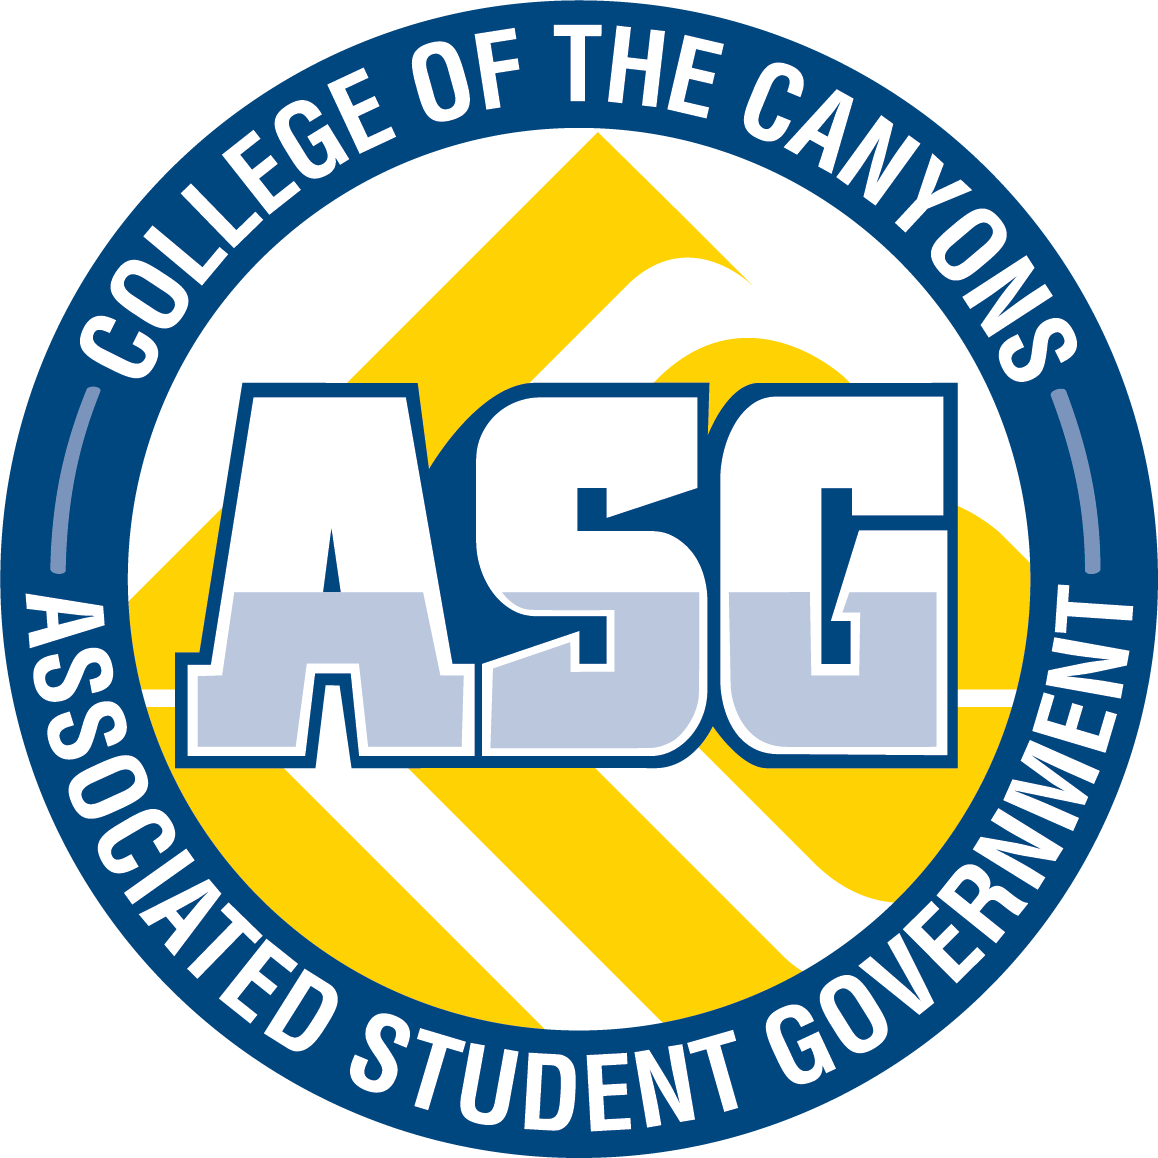 ASG Logo - Associated Student Government